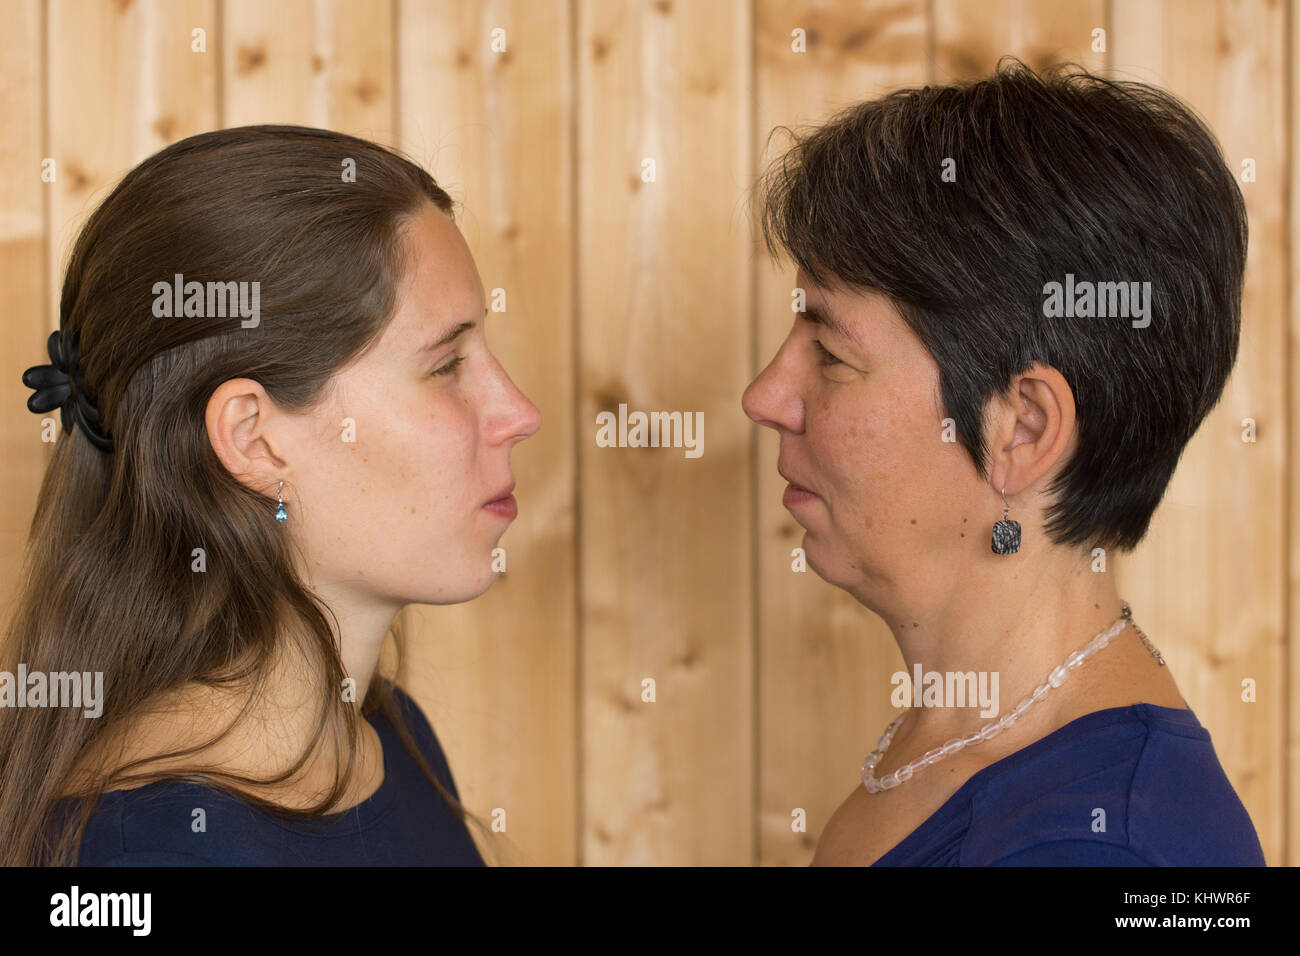 A mother and daughter staring and angry with each other Stock Photo